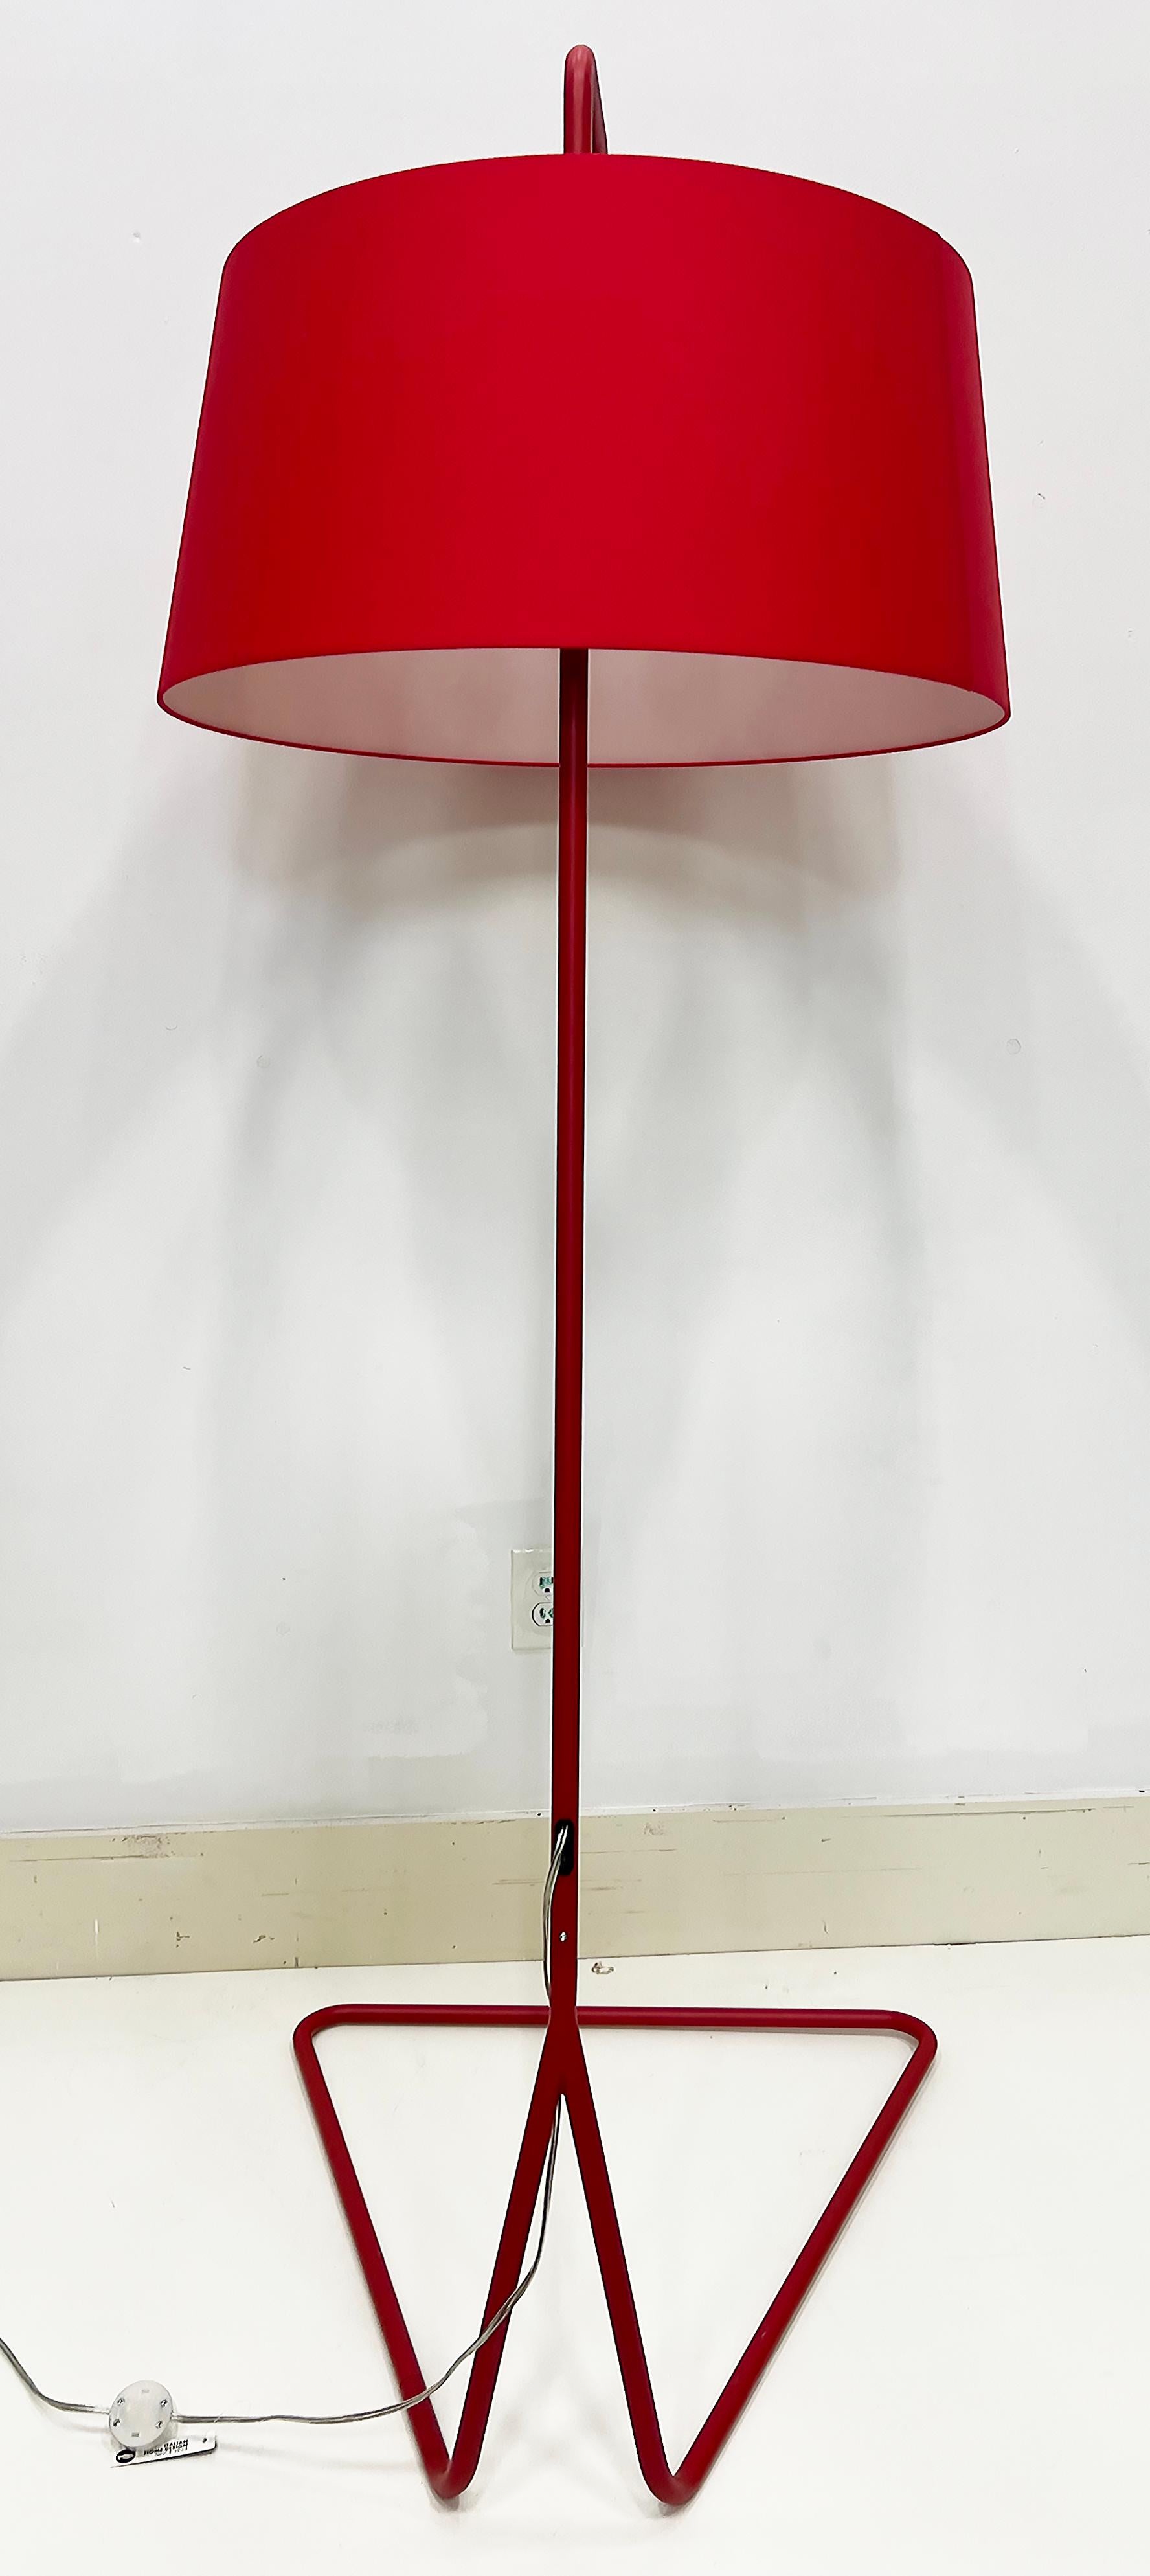 Italian Like New Calligaris Sextans Floor Lamp in Red from Italy For Sale